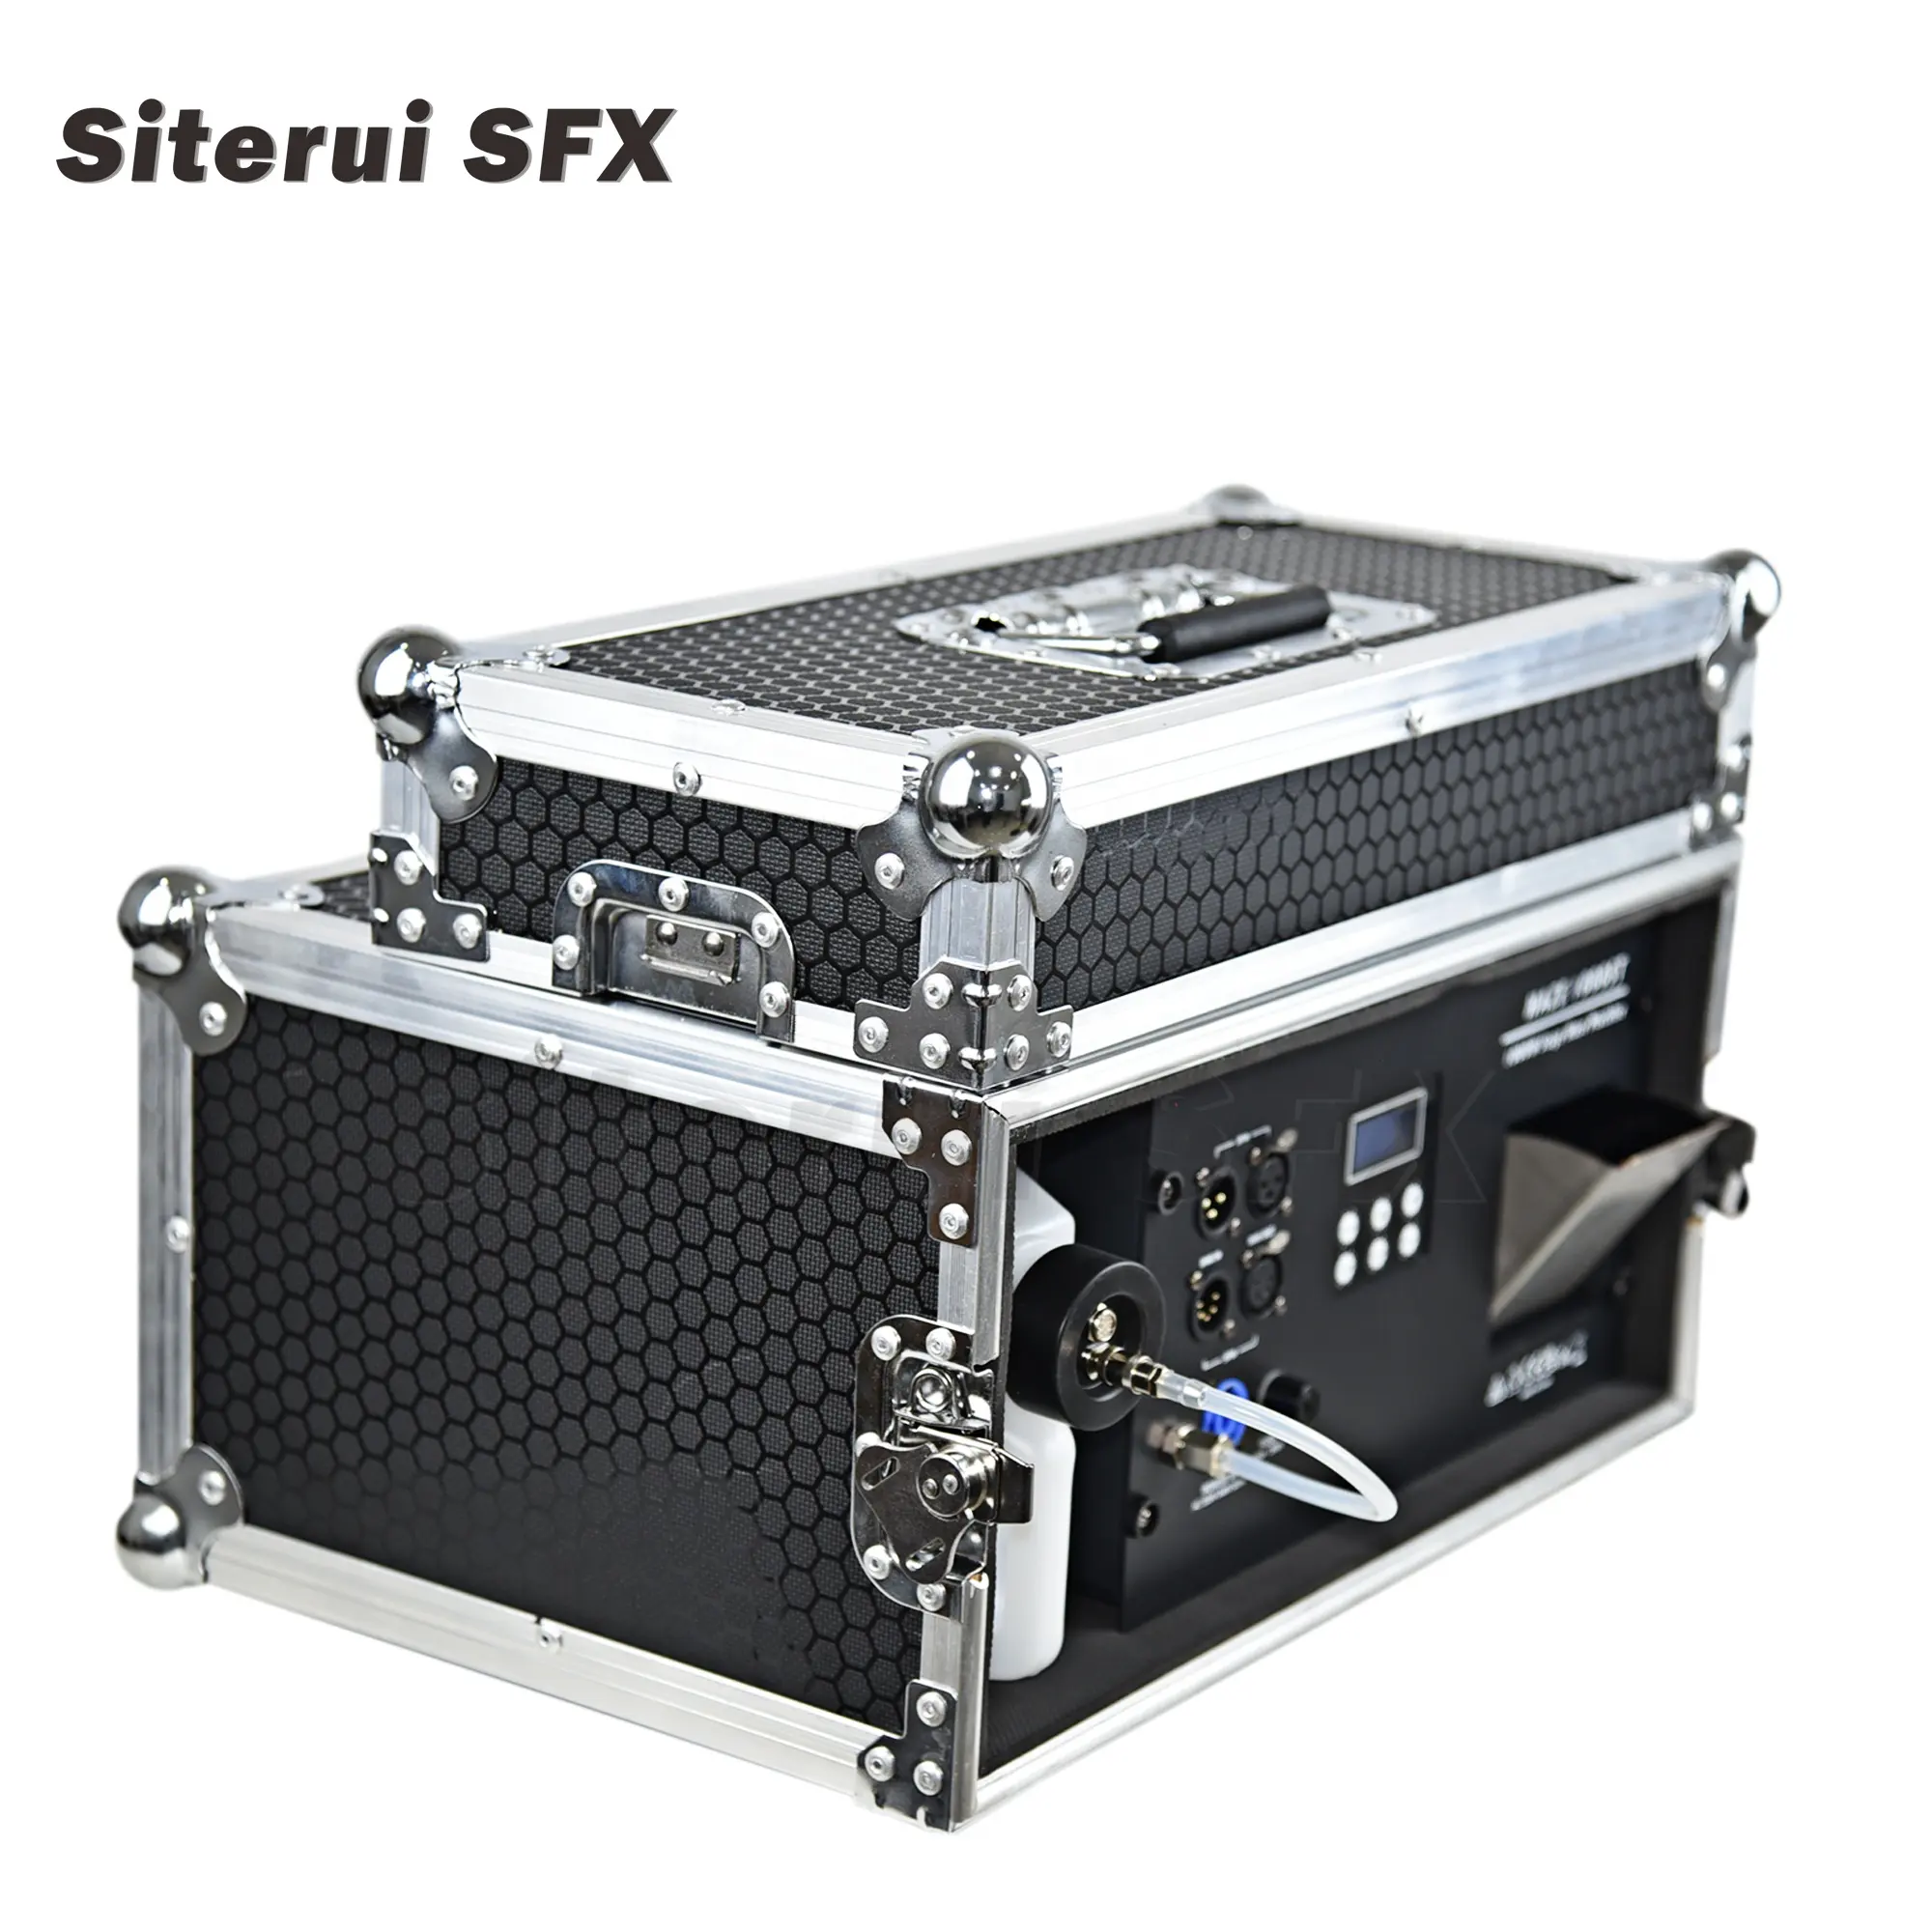 Siterui SFX 1000W DMX512 Control Morning Haze Machine Professional Stage Fog Making Machine For Disco Party Stage Bars Theater